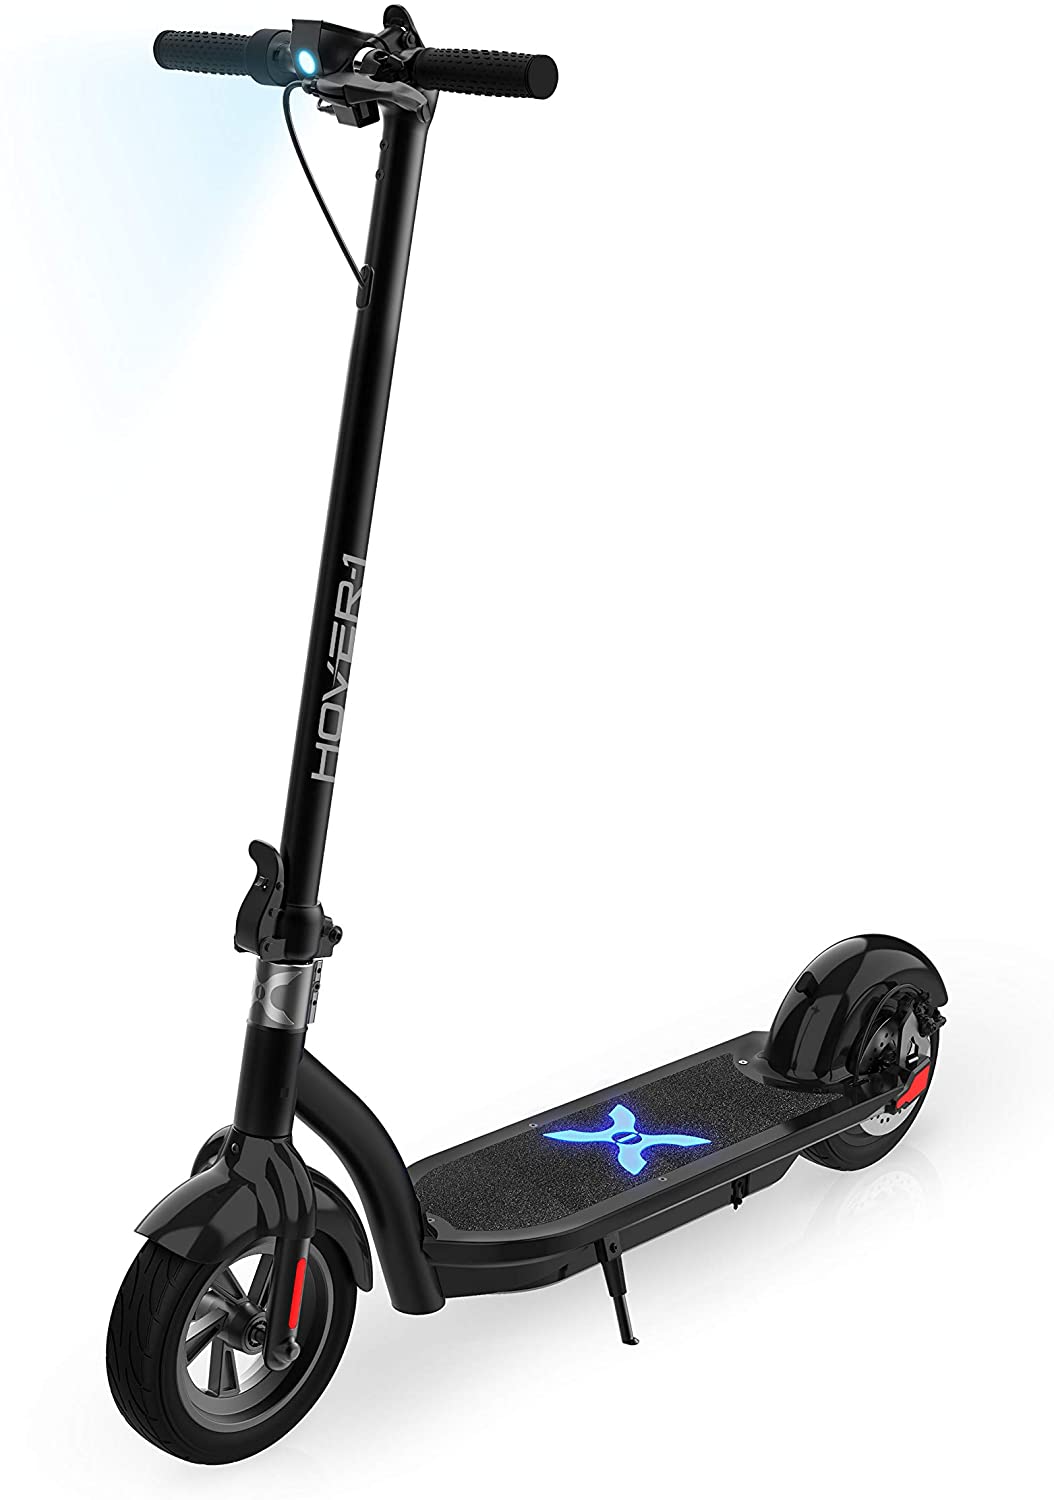 5 Best Electric Scooters With Light – Better Road Visibility